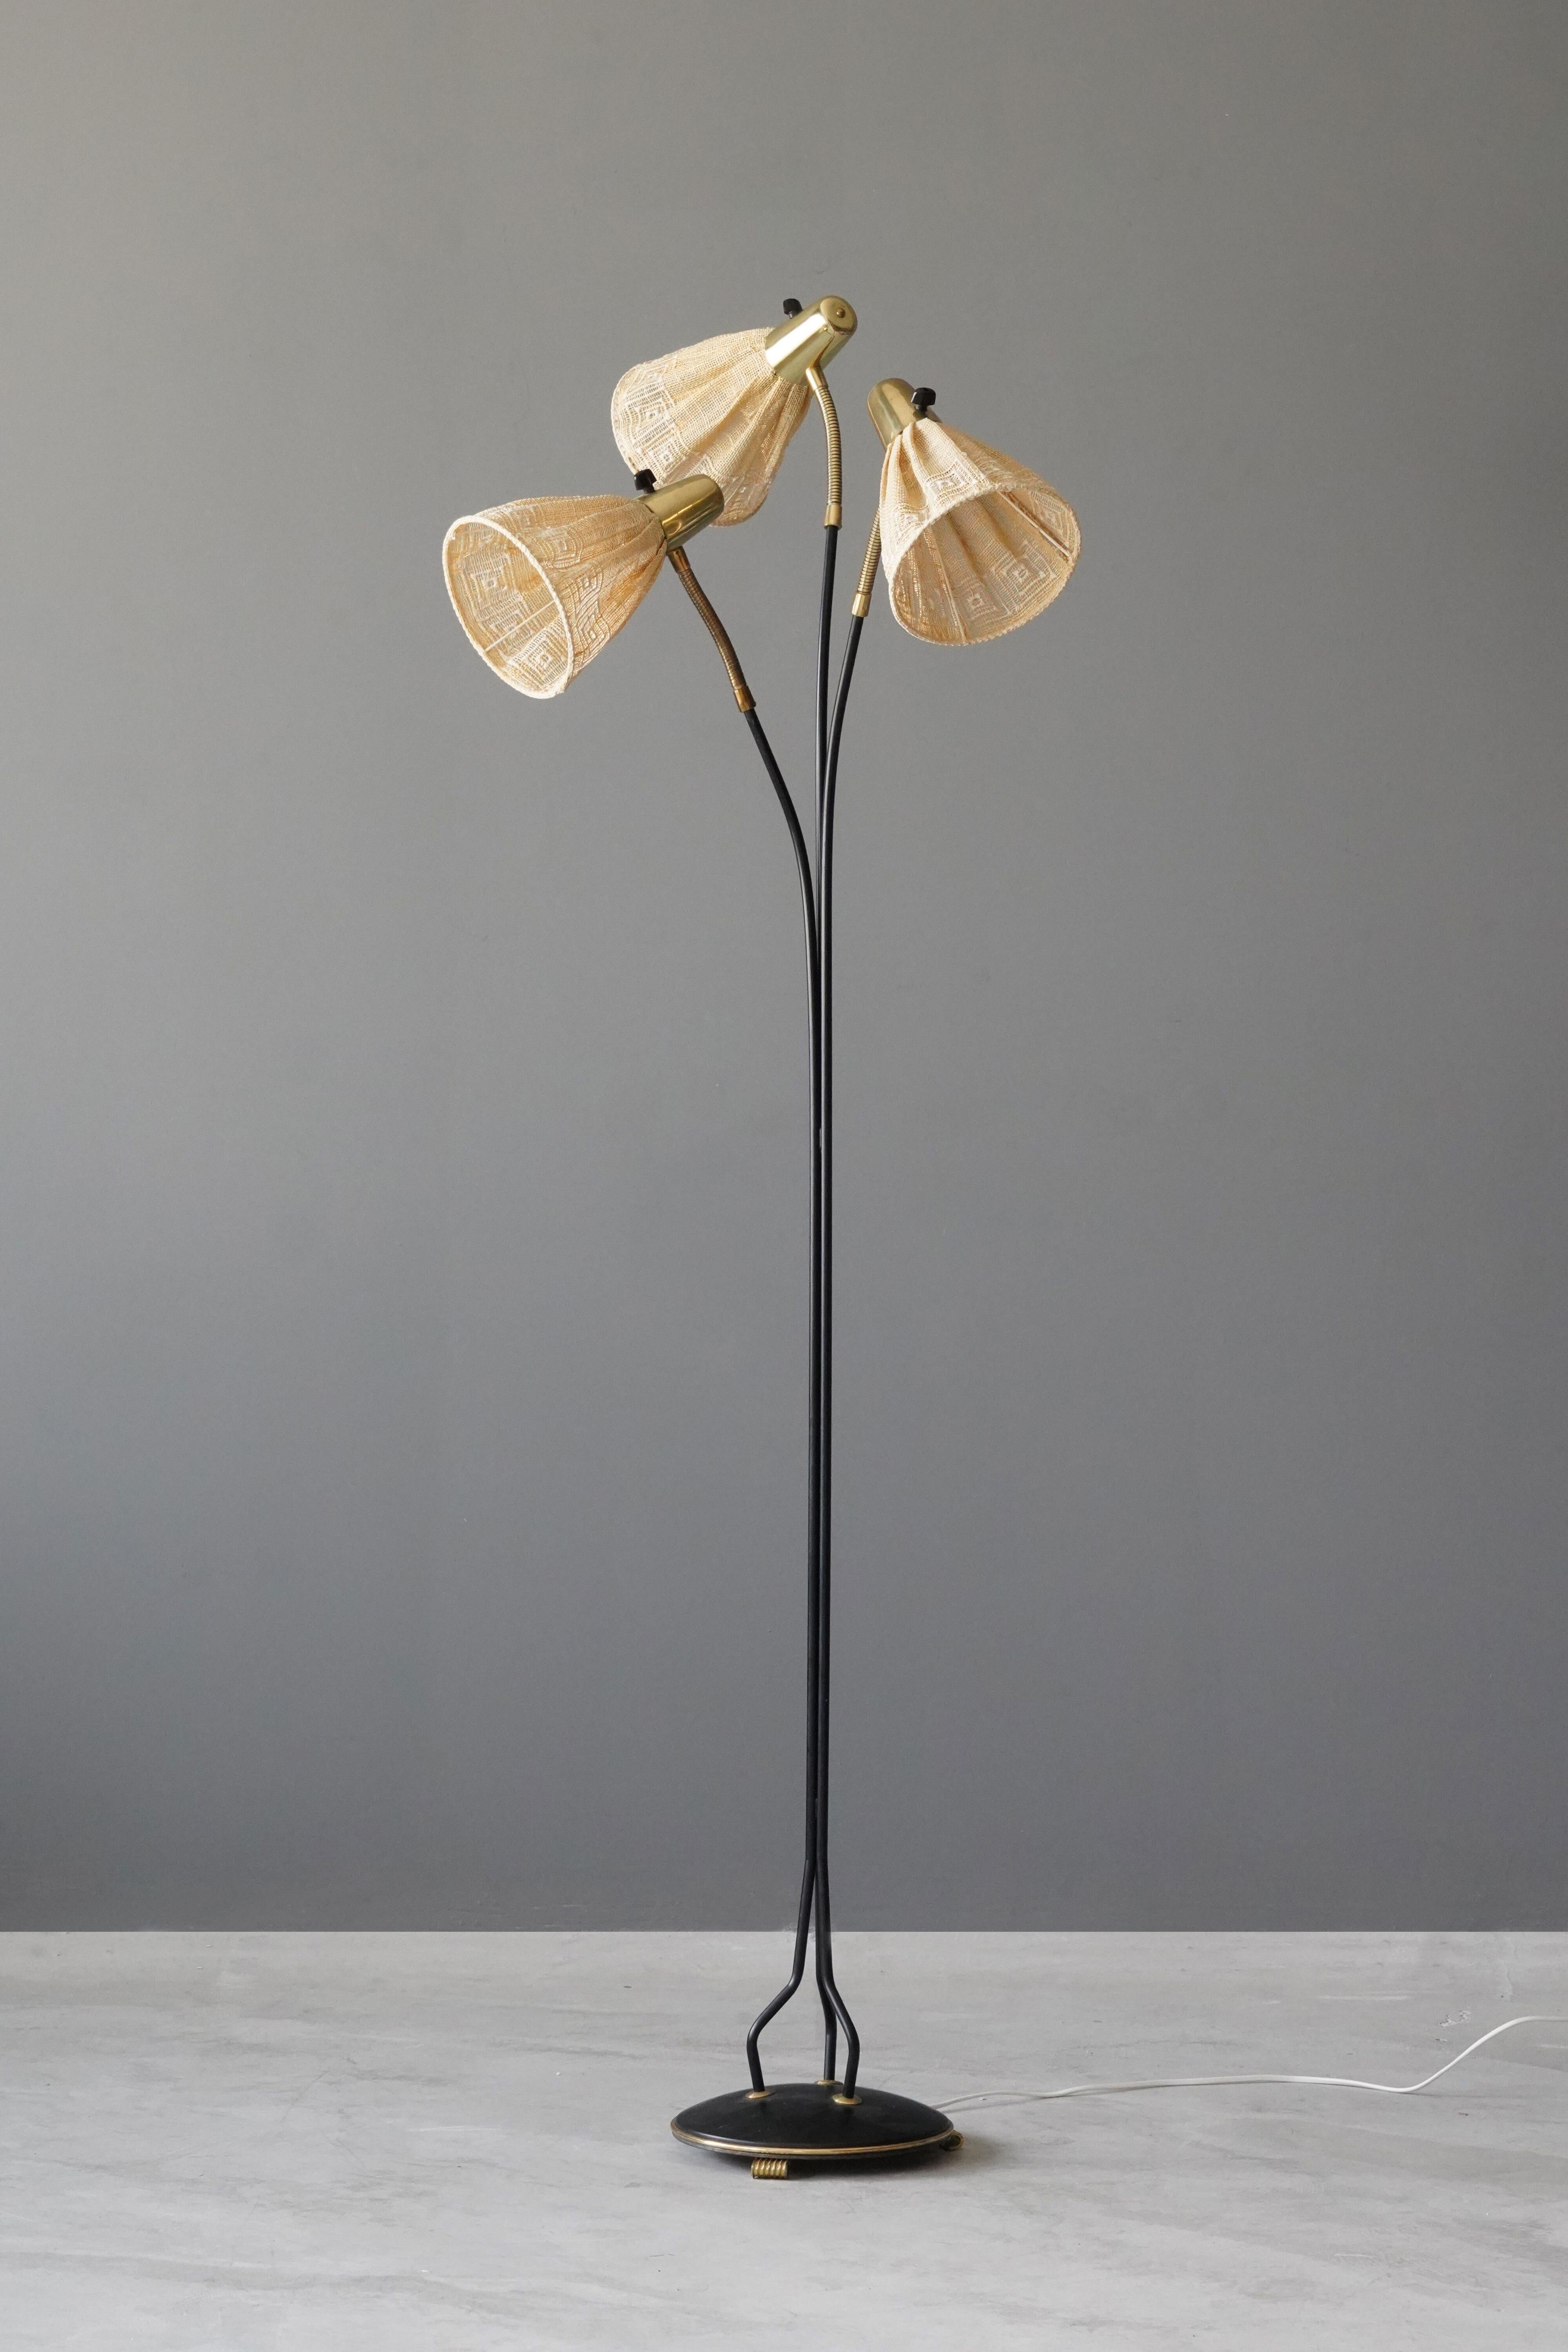 An adjustable three-armed floor lamp. In lacquered metal, brass. Original fabric lampshades.

Other designers of the period include Paavo Tynell, Hans Bergström, Hans Agne Jakobsson, Alvar Aalto, and Lisa Johansson-Pape.